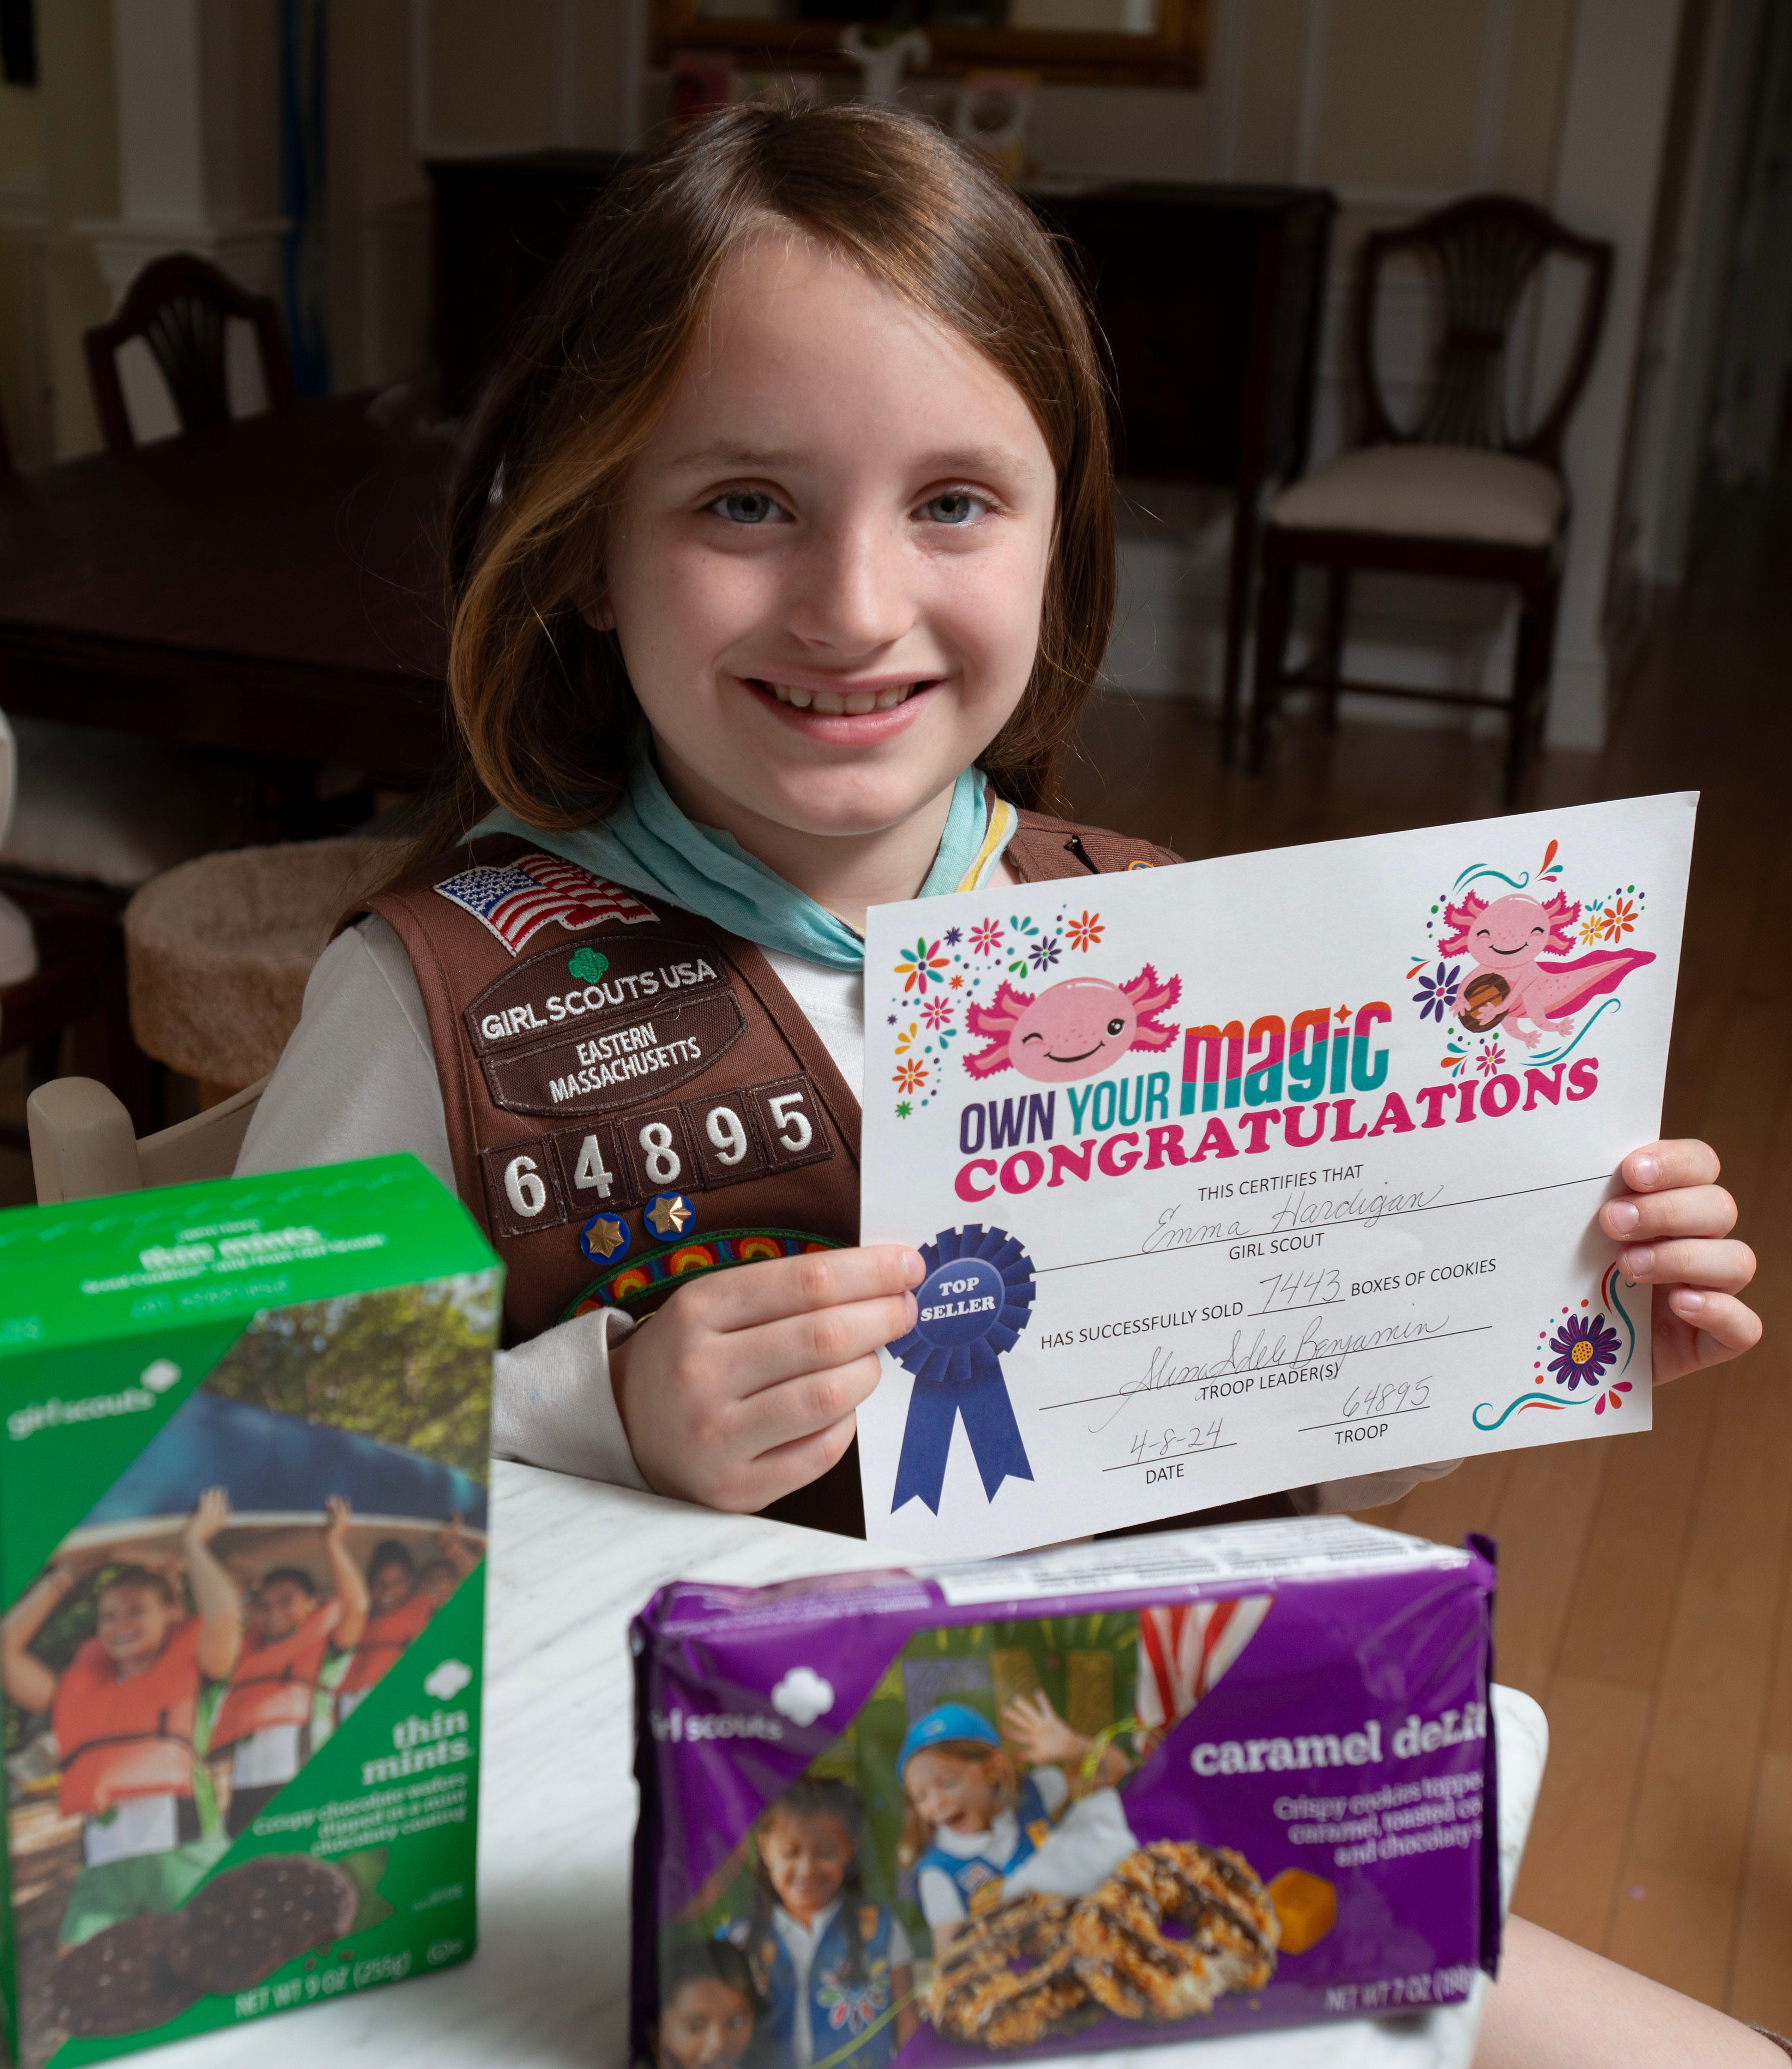 'Entrepreneur at the age of 8.' Yarmouth Girl Scout breaks cookie record in Eastern Mass.